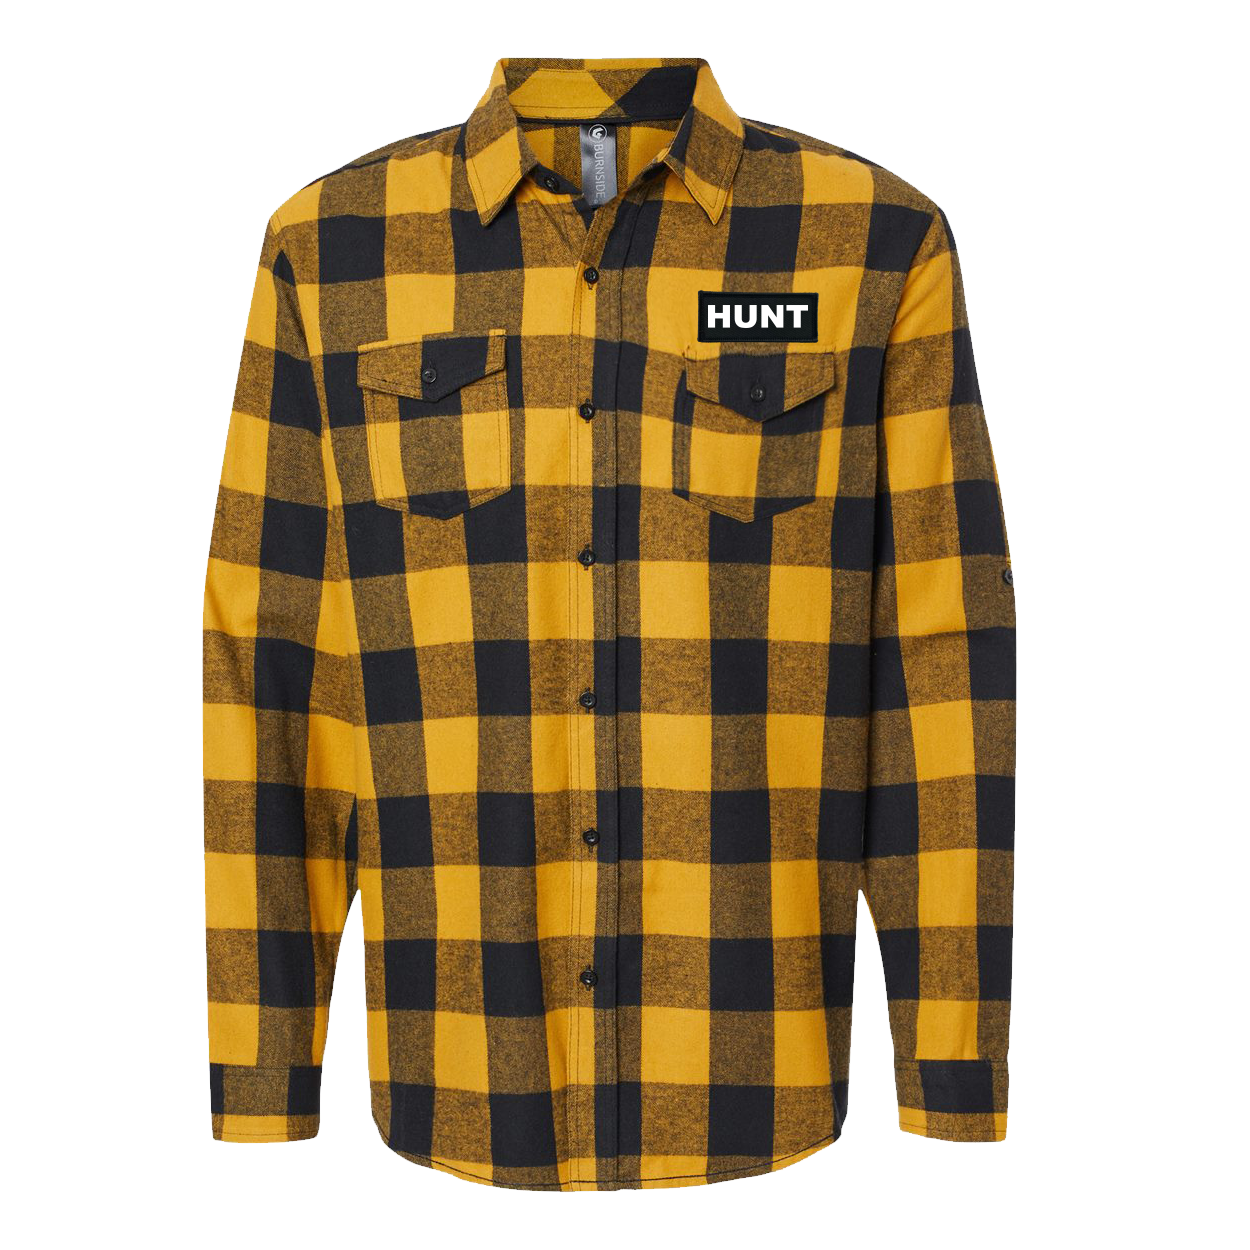 Hunt Brand Logo Night Out Rectangle Woven Patch Flannel Shirt Black/Gold